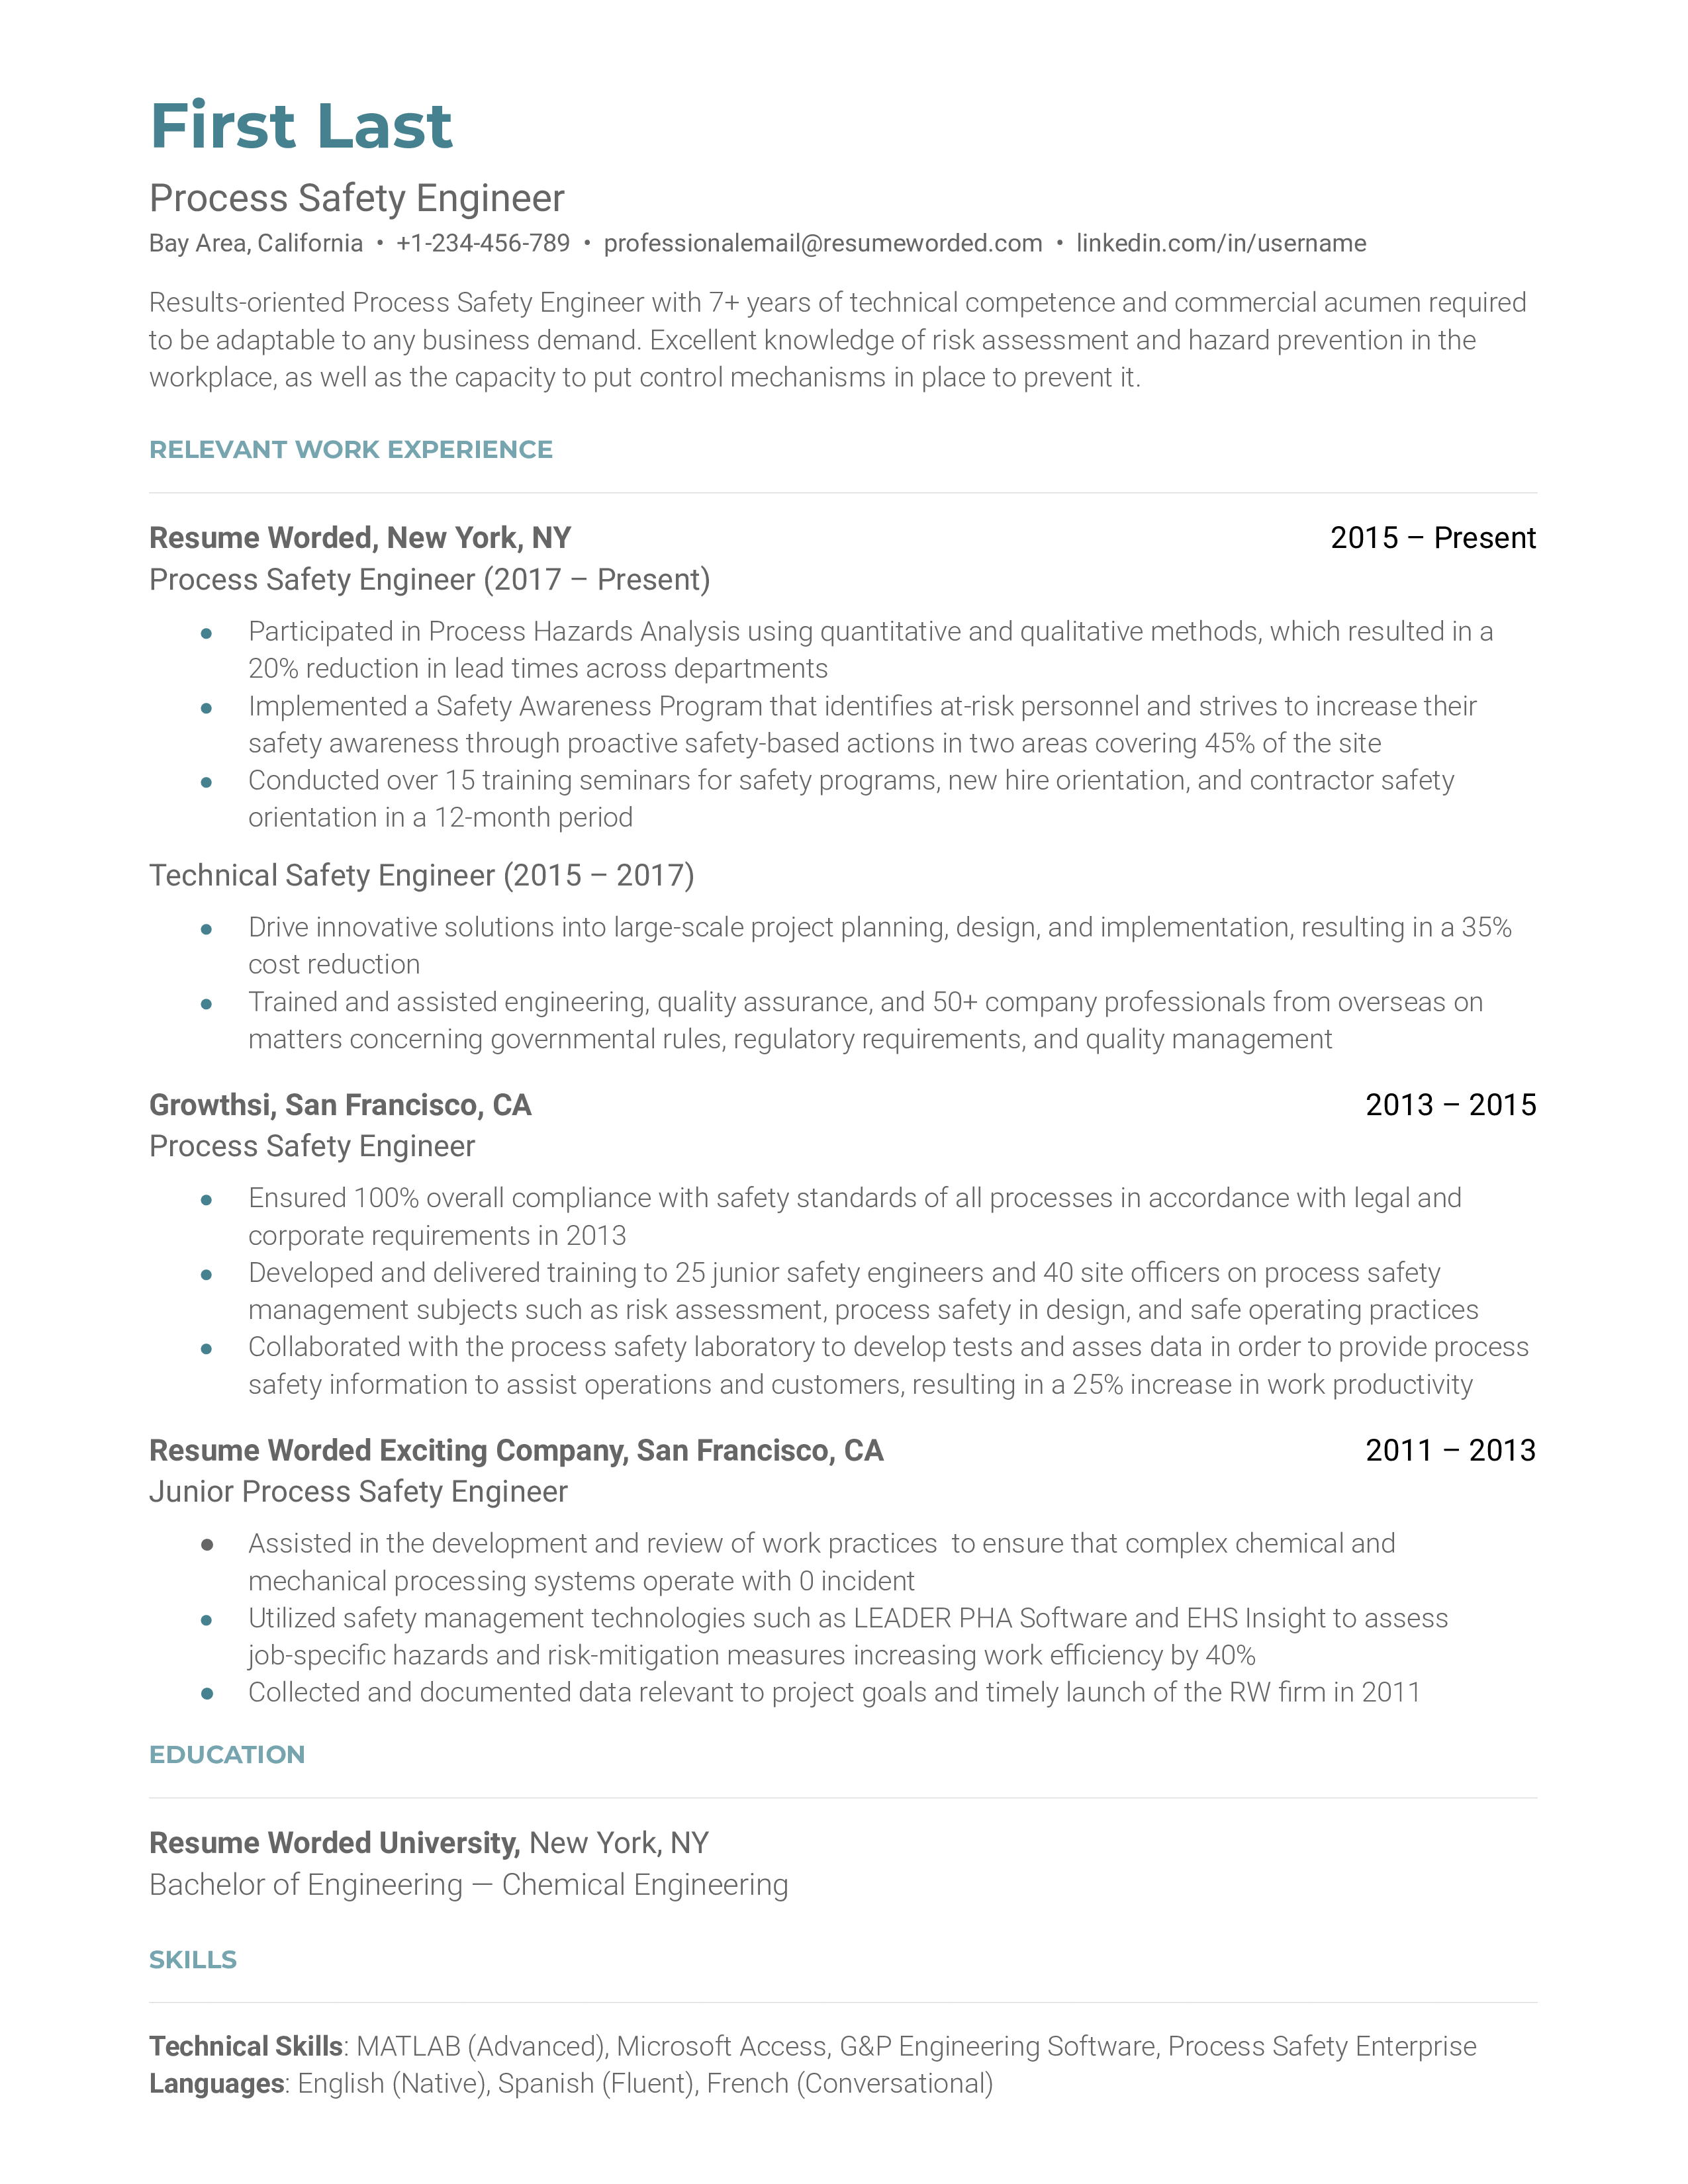 A process safety engineer resume template that uses metrics to quantify achievements